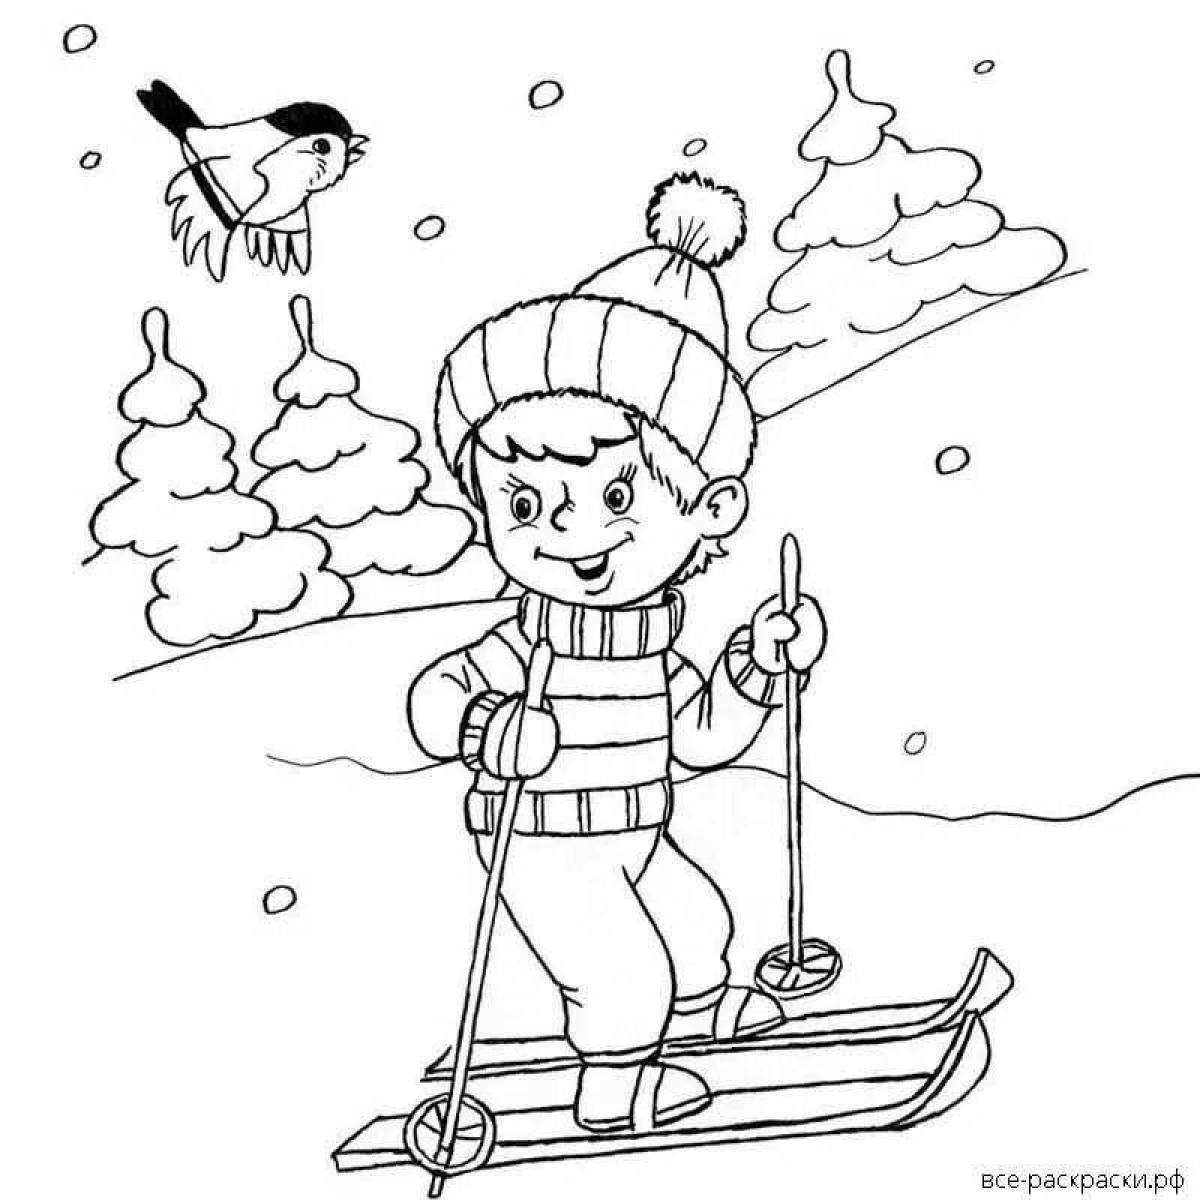 Wonderful winter coloring for children 6-7 years old